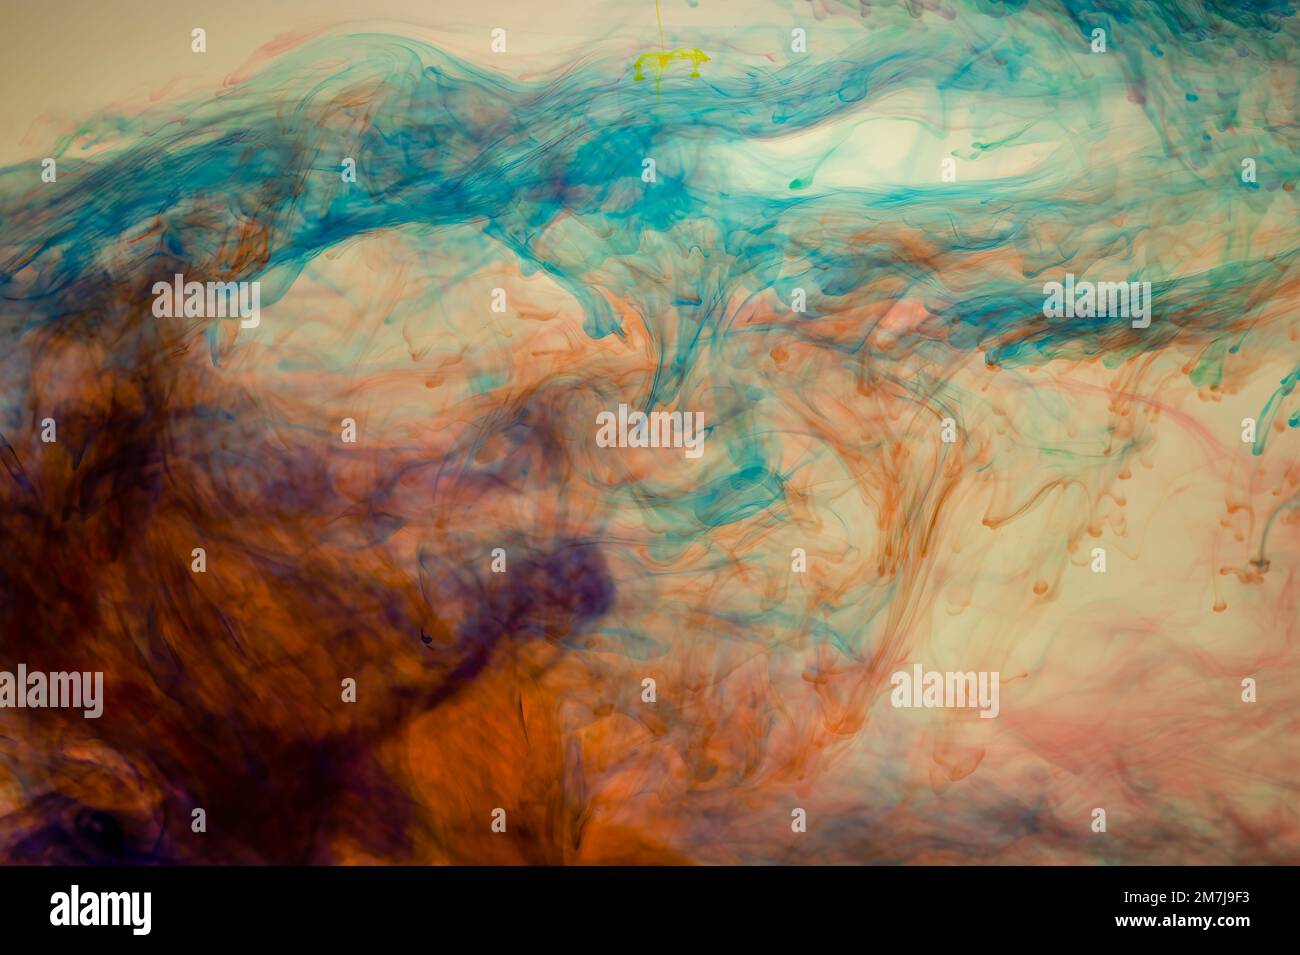 Food colouring swirling through water creating abstract patterns Stock Photo